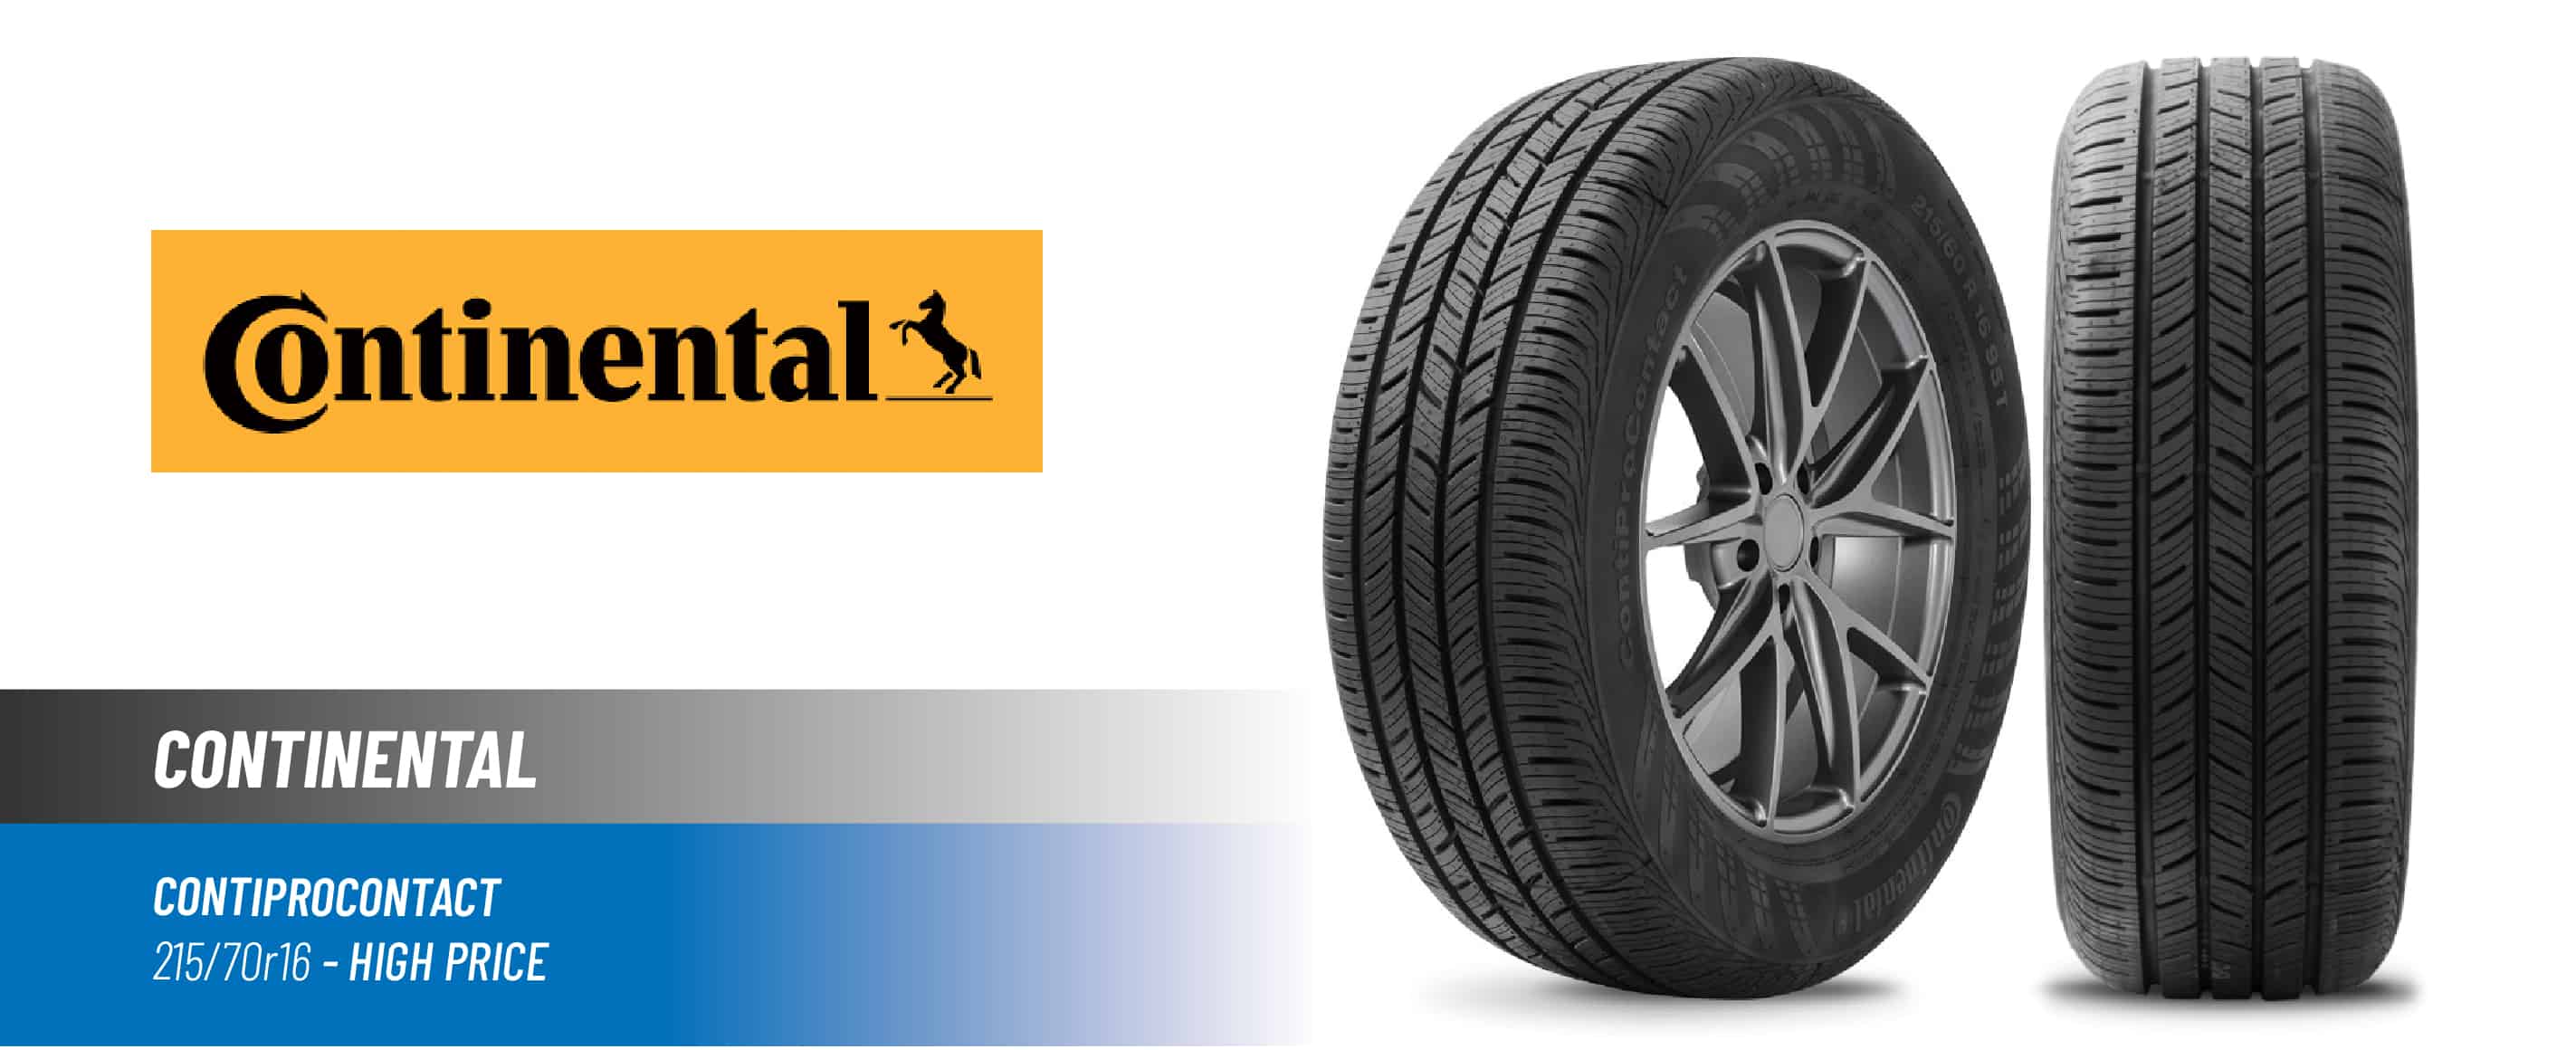 Top#4 High Price: Continental ContiProContact –best 215/70r16